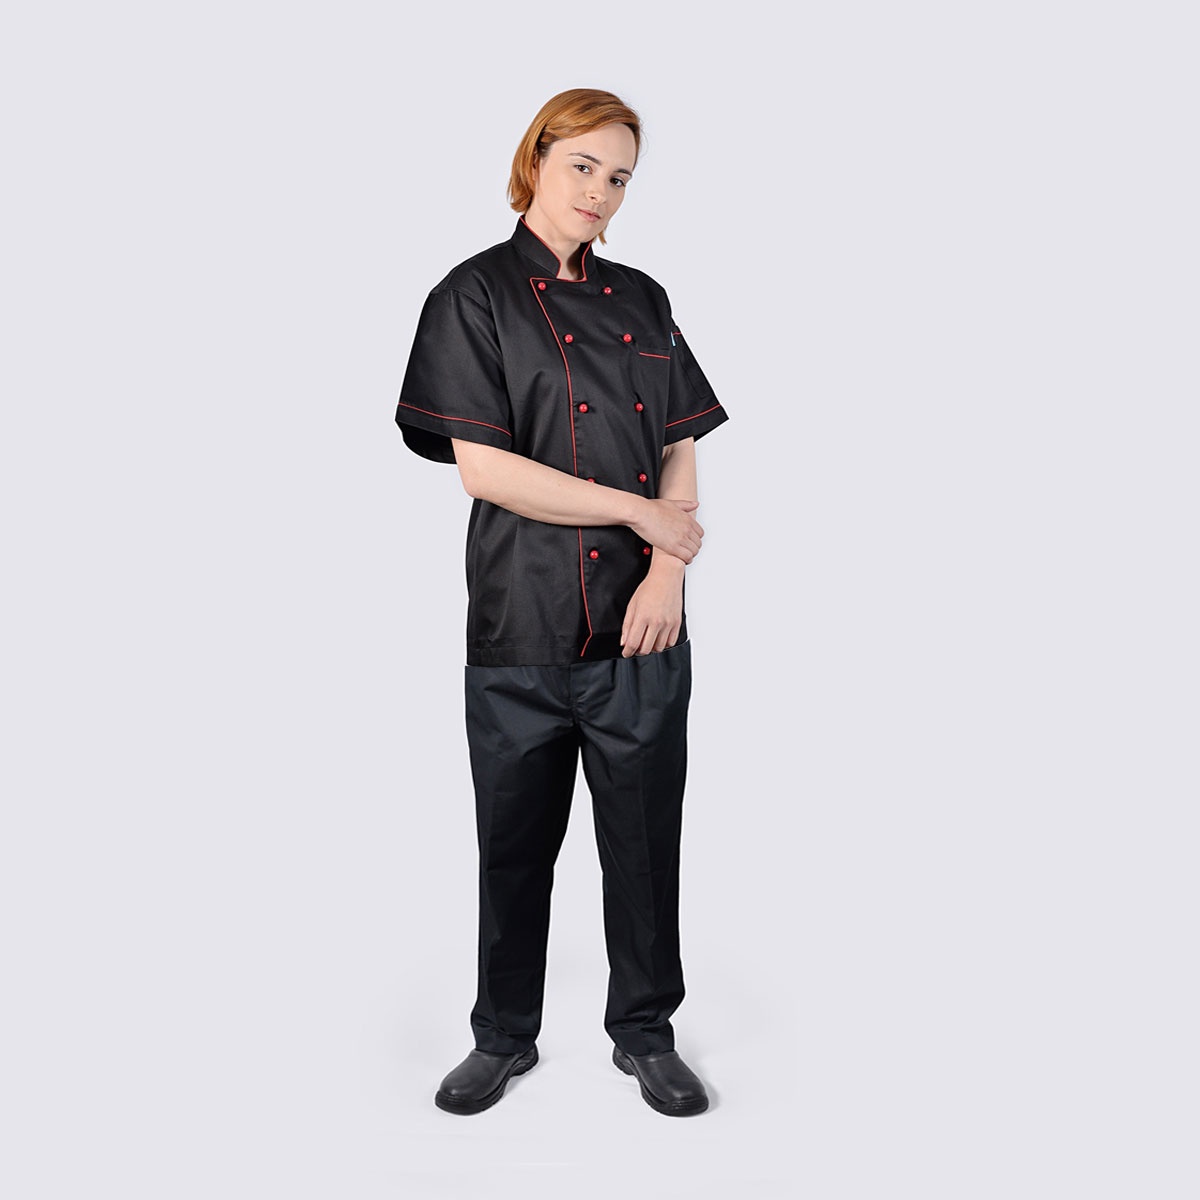 Chef Jacket Black with Red Piping Short Sleeve and Black Pant